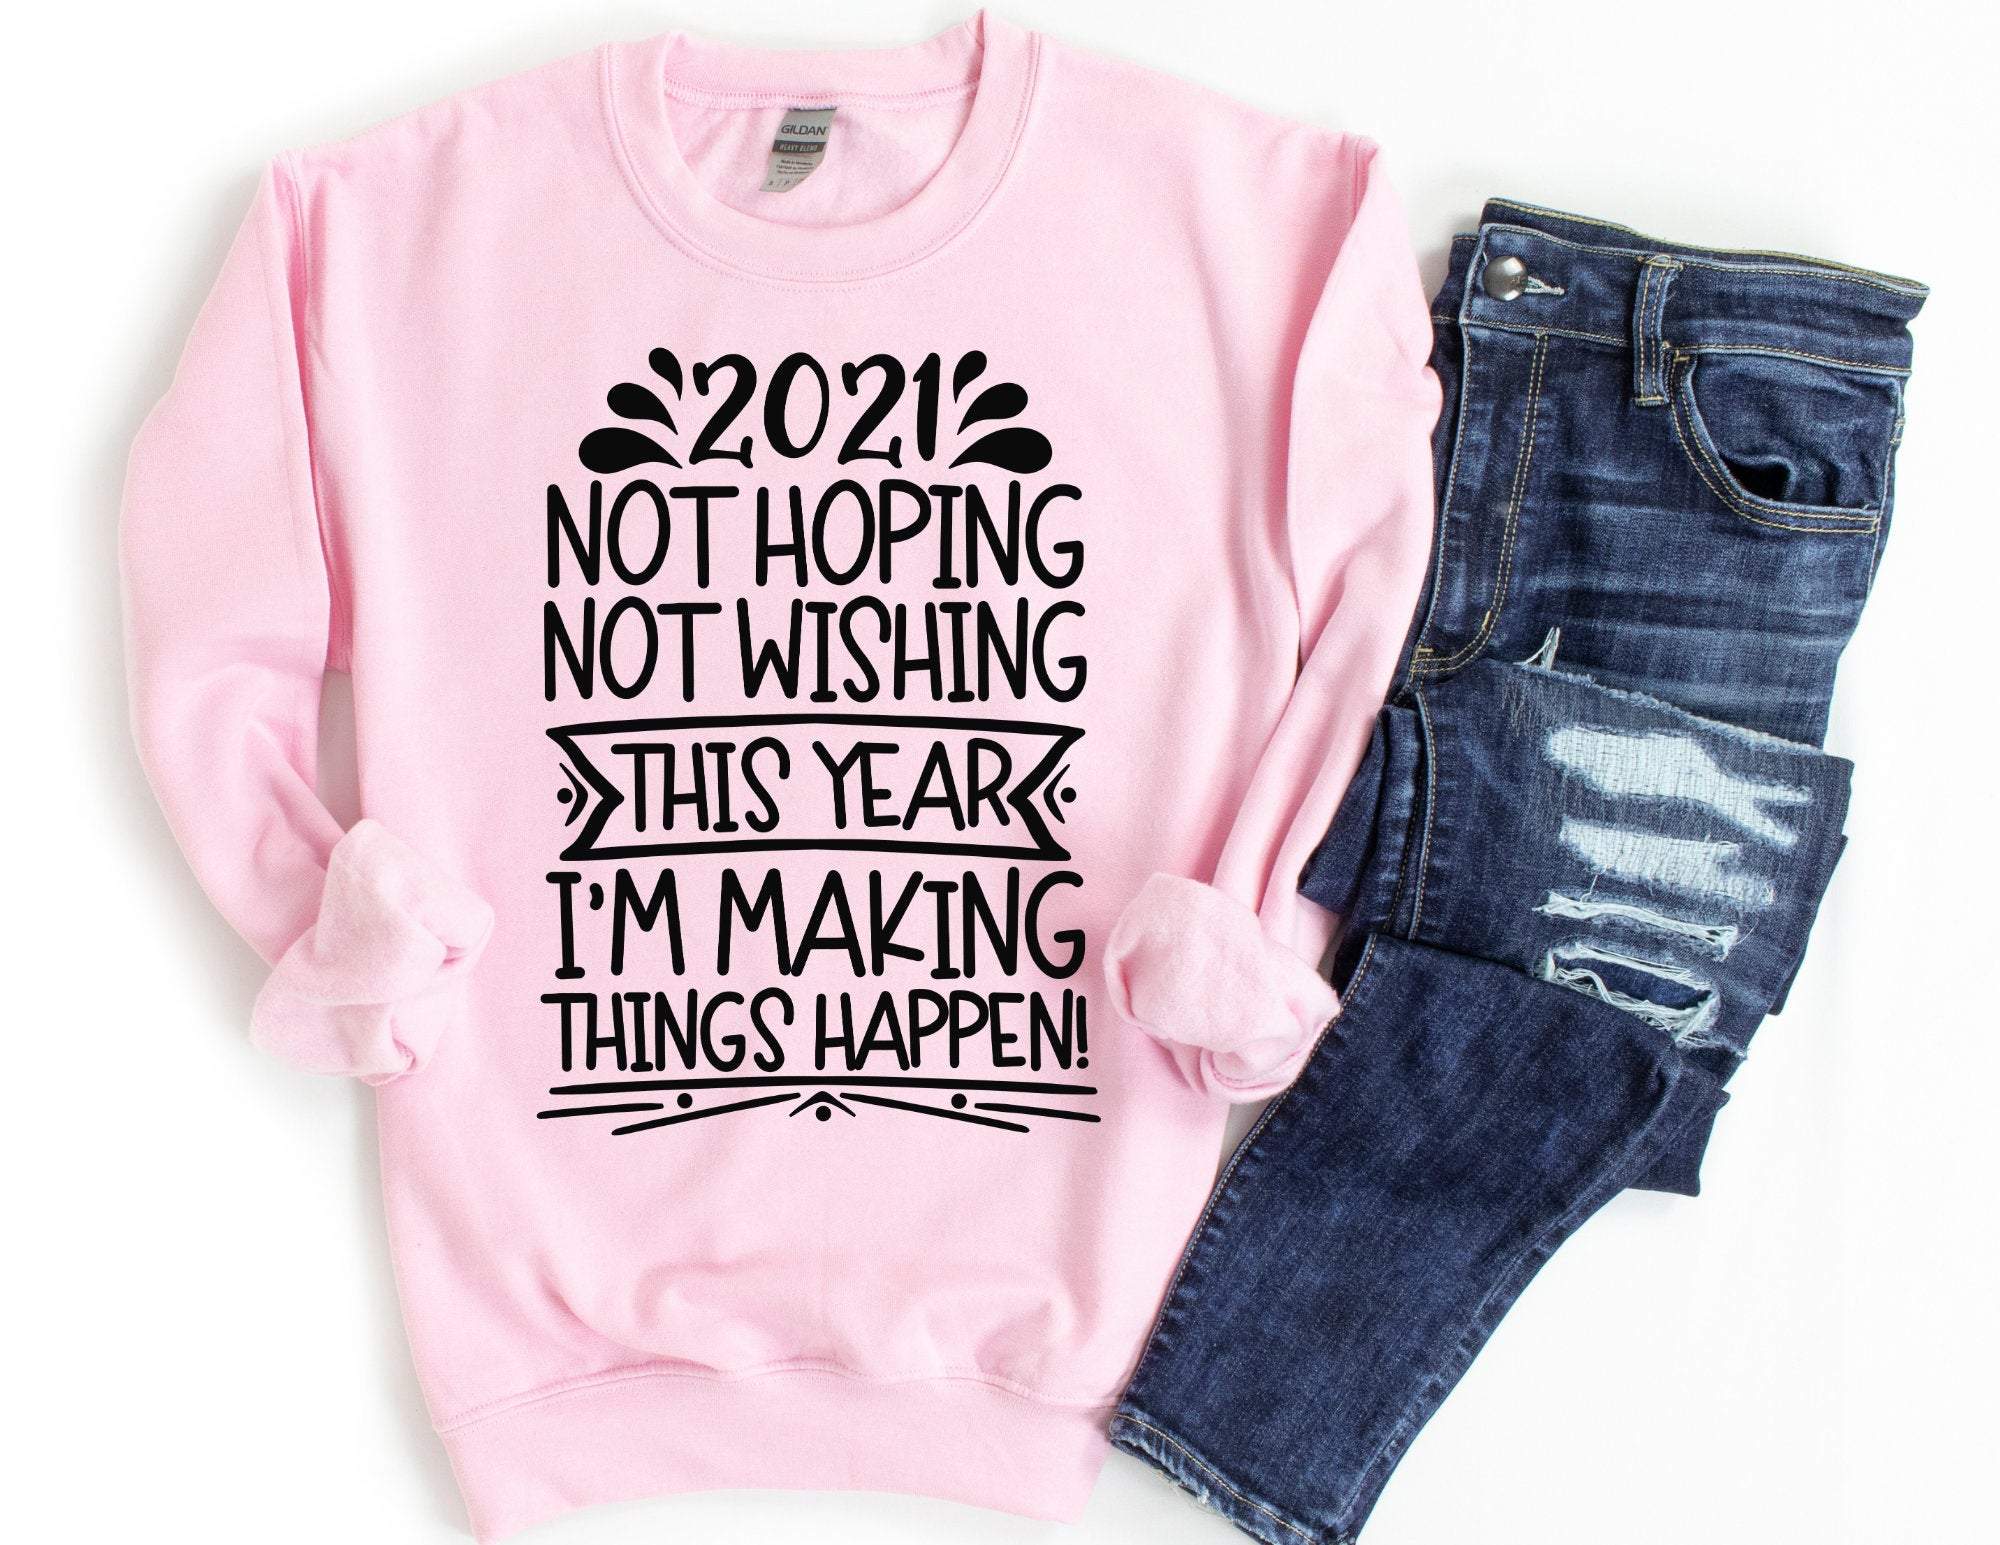 2021 This Year I’M Making Things Happen Sweater, New Year Sweaters, Bye 2020 Sweater, Happy New Year Sweatshirt, New Year Shirts, 2021 Shirt T-Shirt Hoodie All Color Size S-5Xl